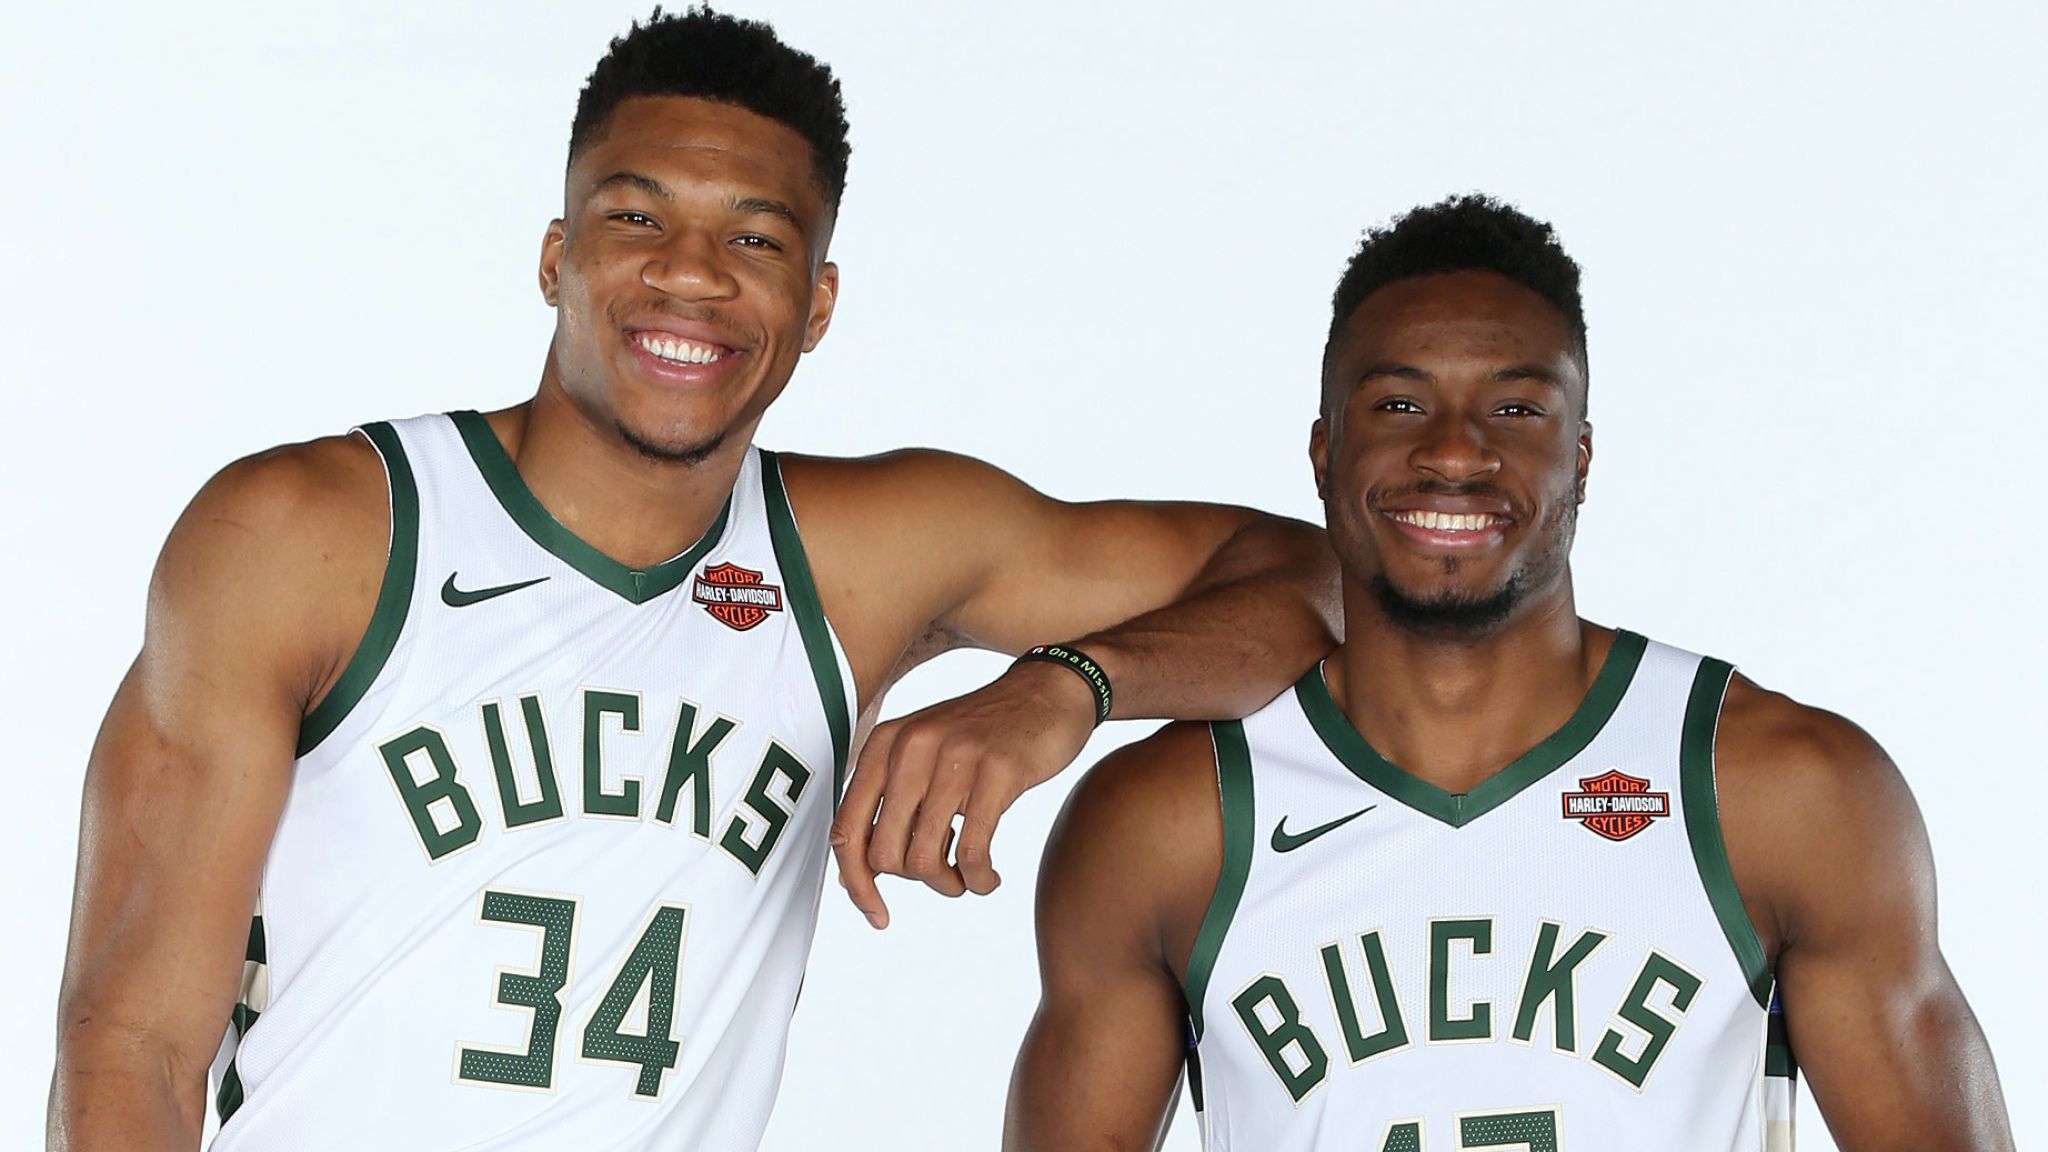 Thanasis Joins Brother Giannis For New Season With ...